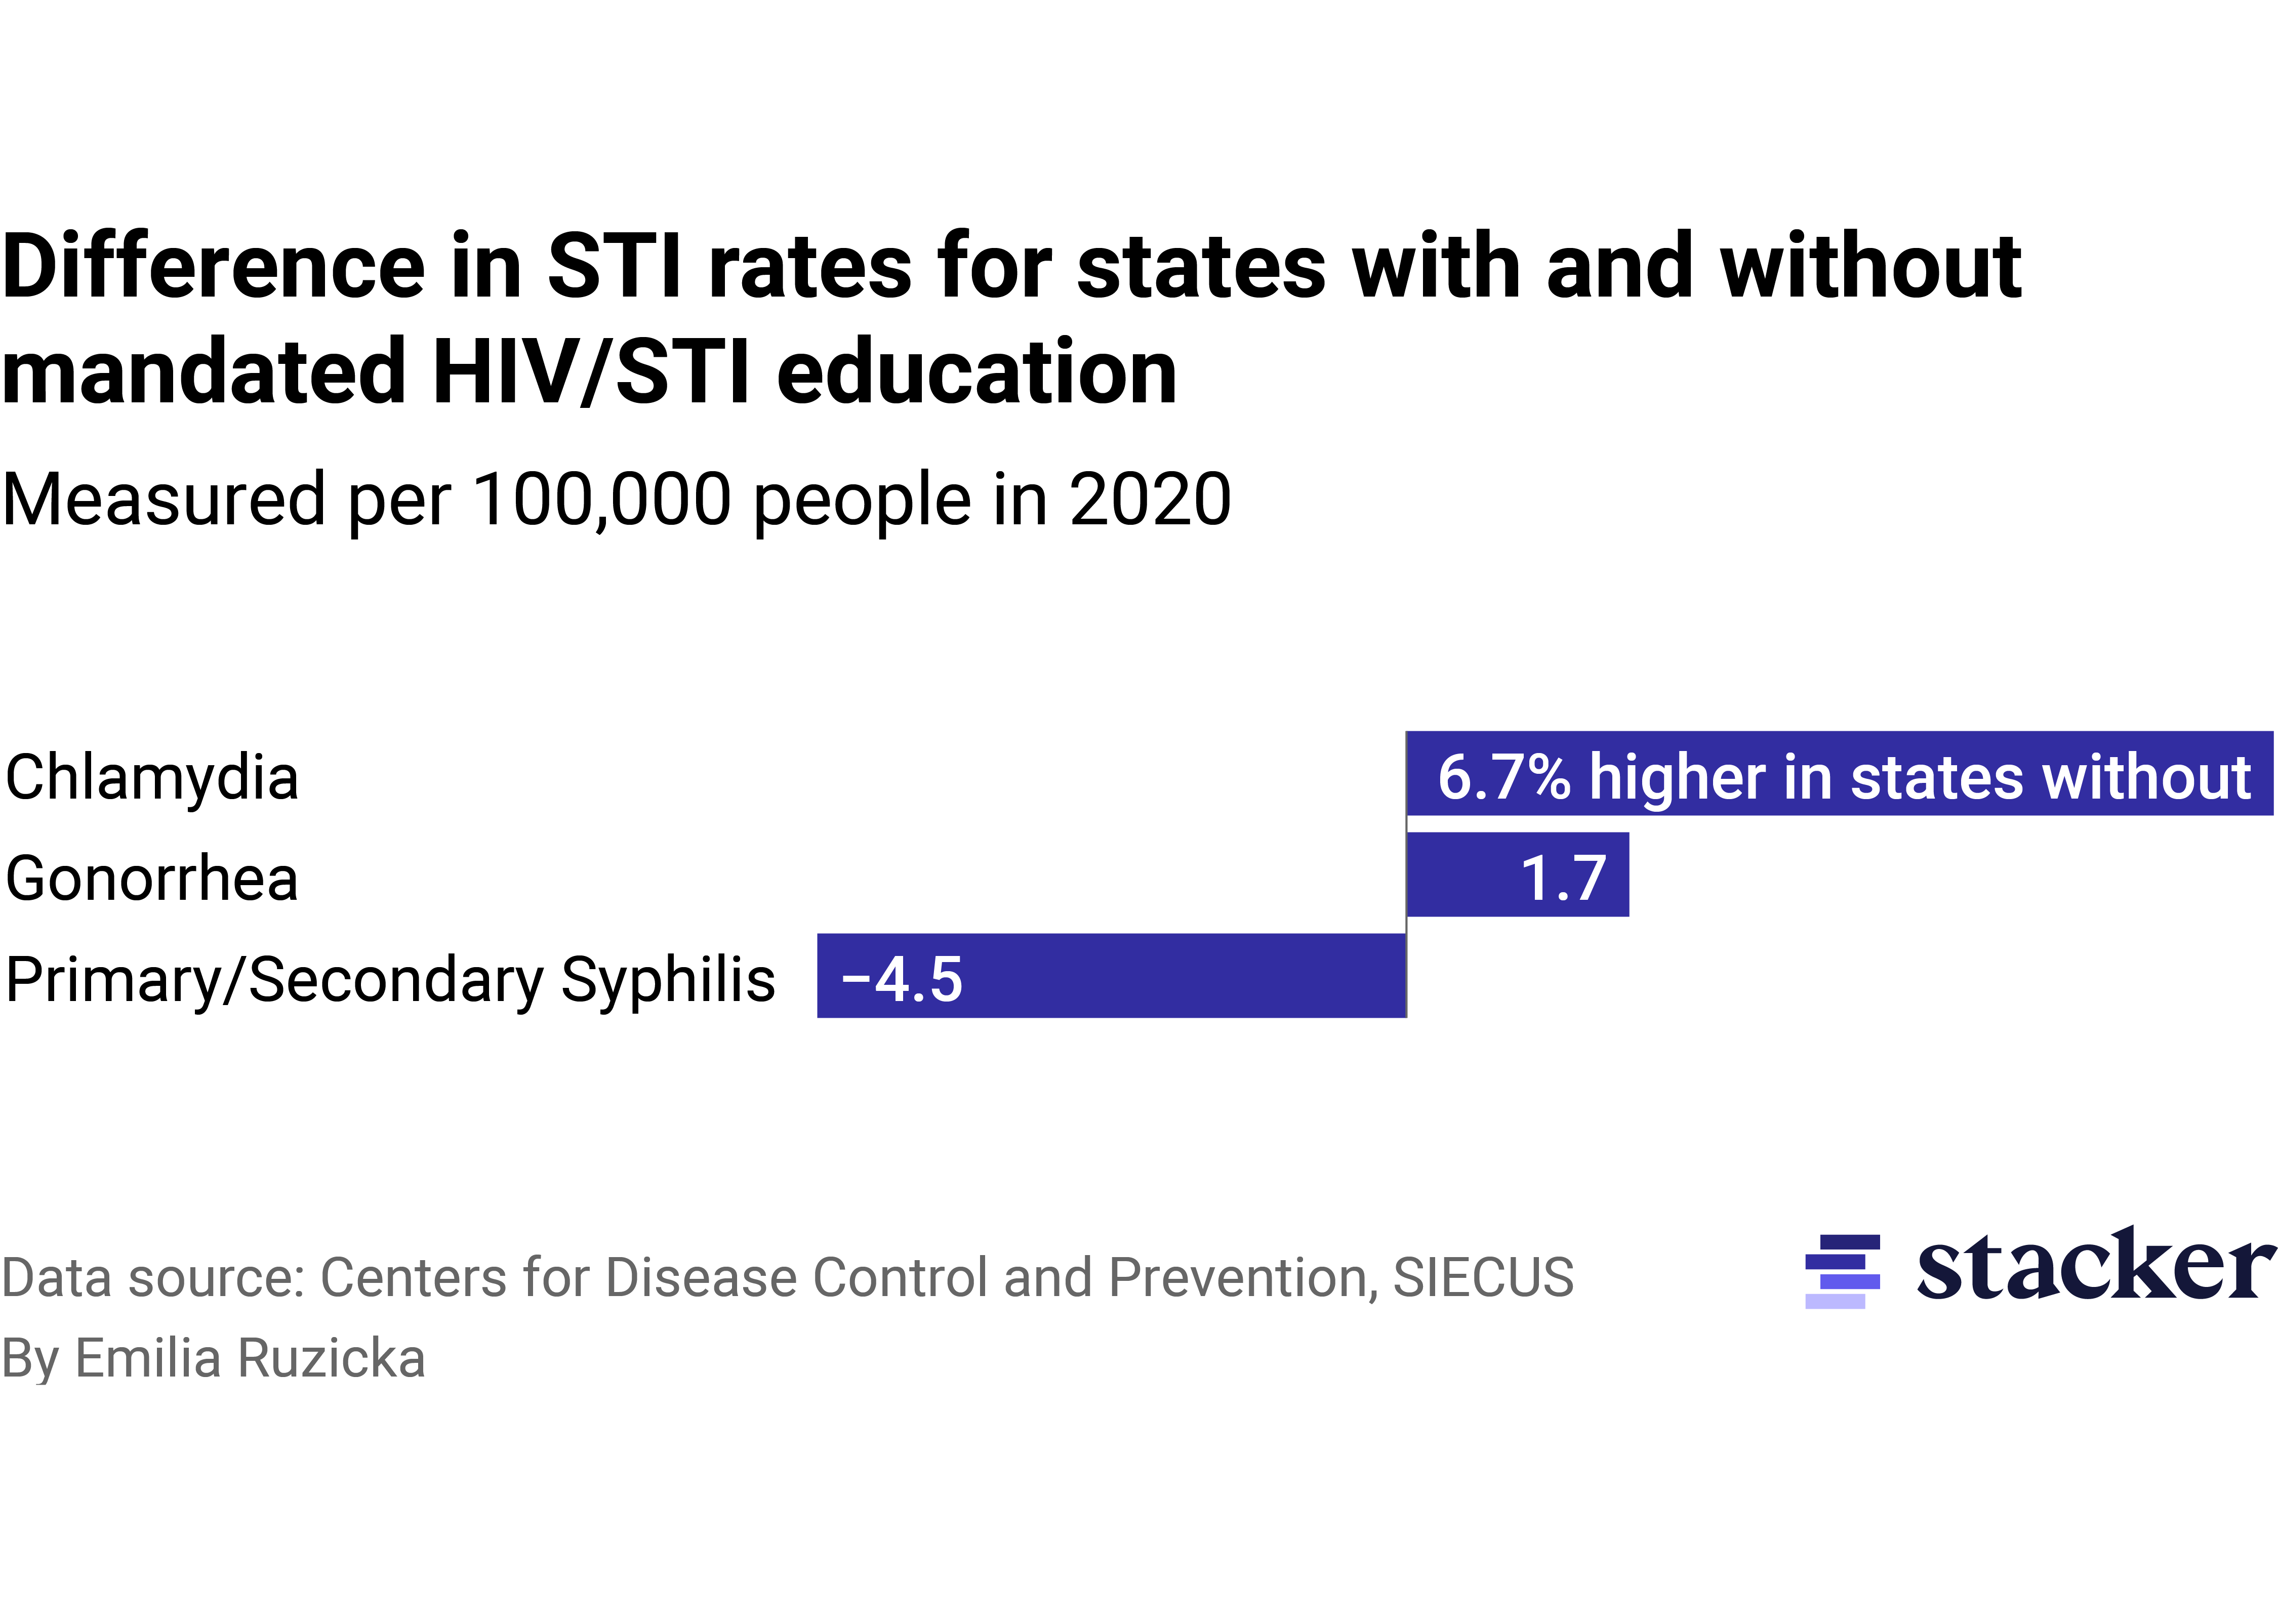 A bar chart showing the difference in STI rates for states with and without mandated HIV/STI education